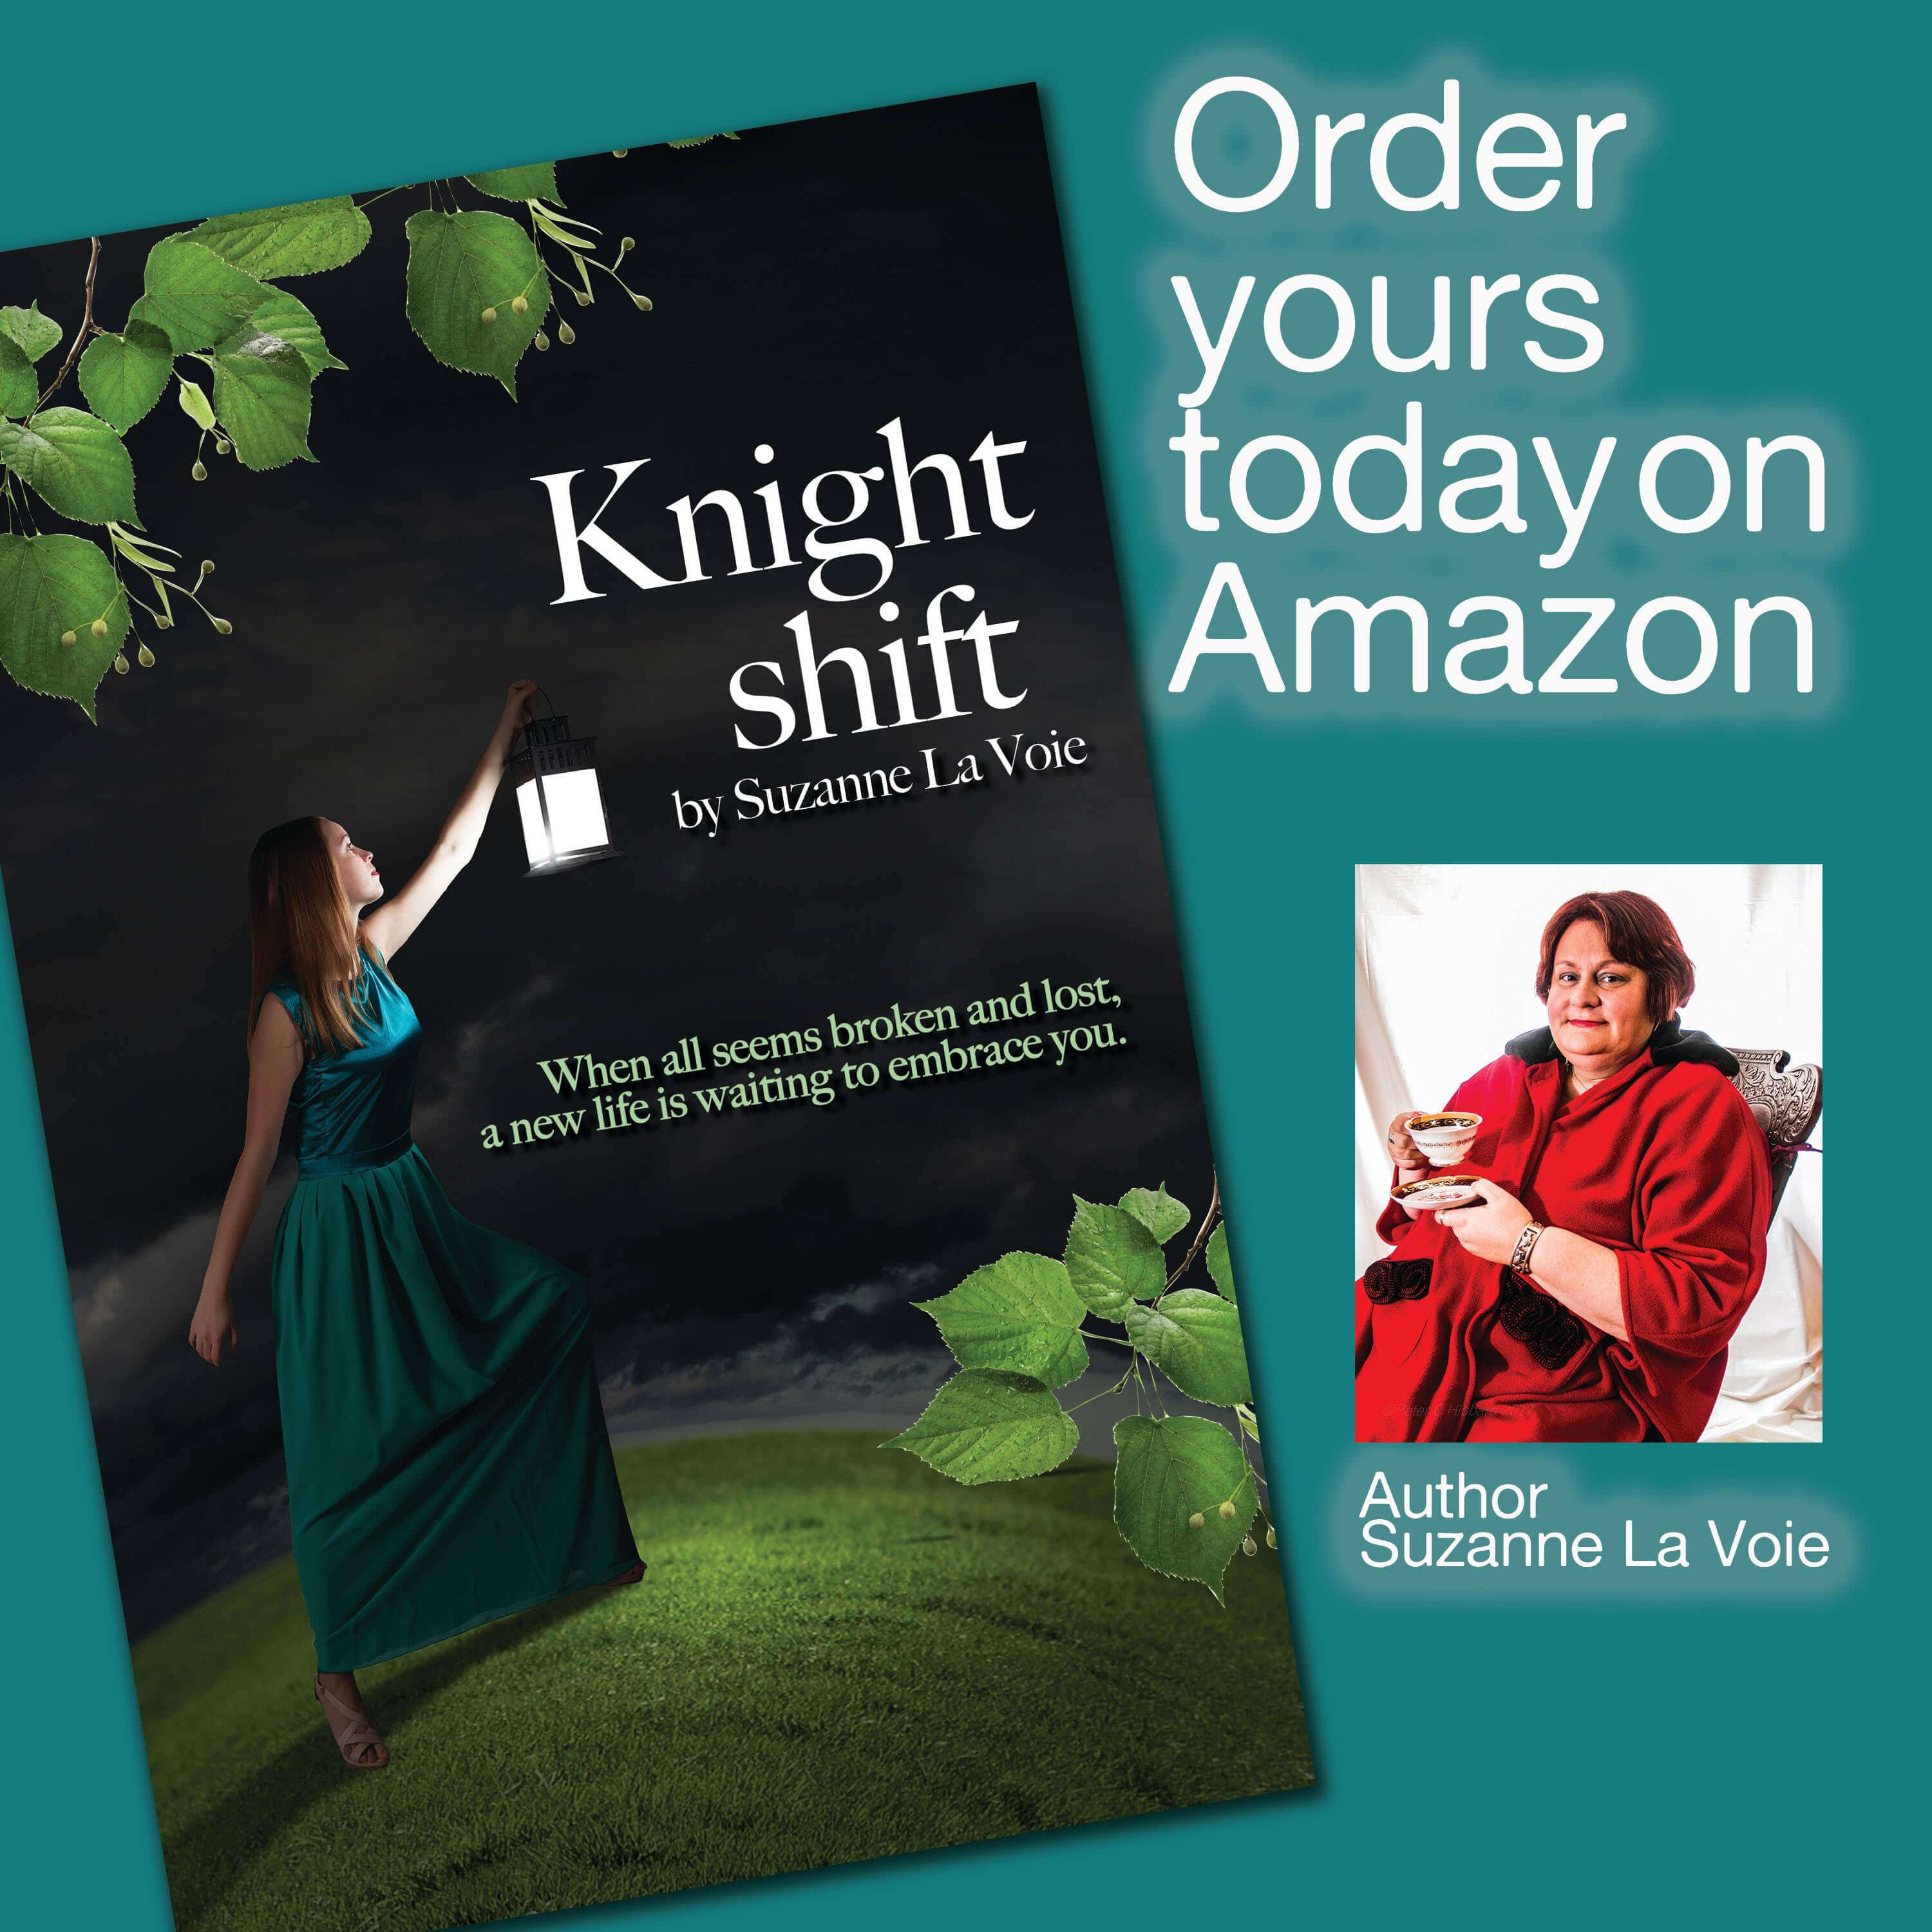 knight shift book cover order yours today on amazon